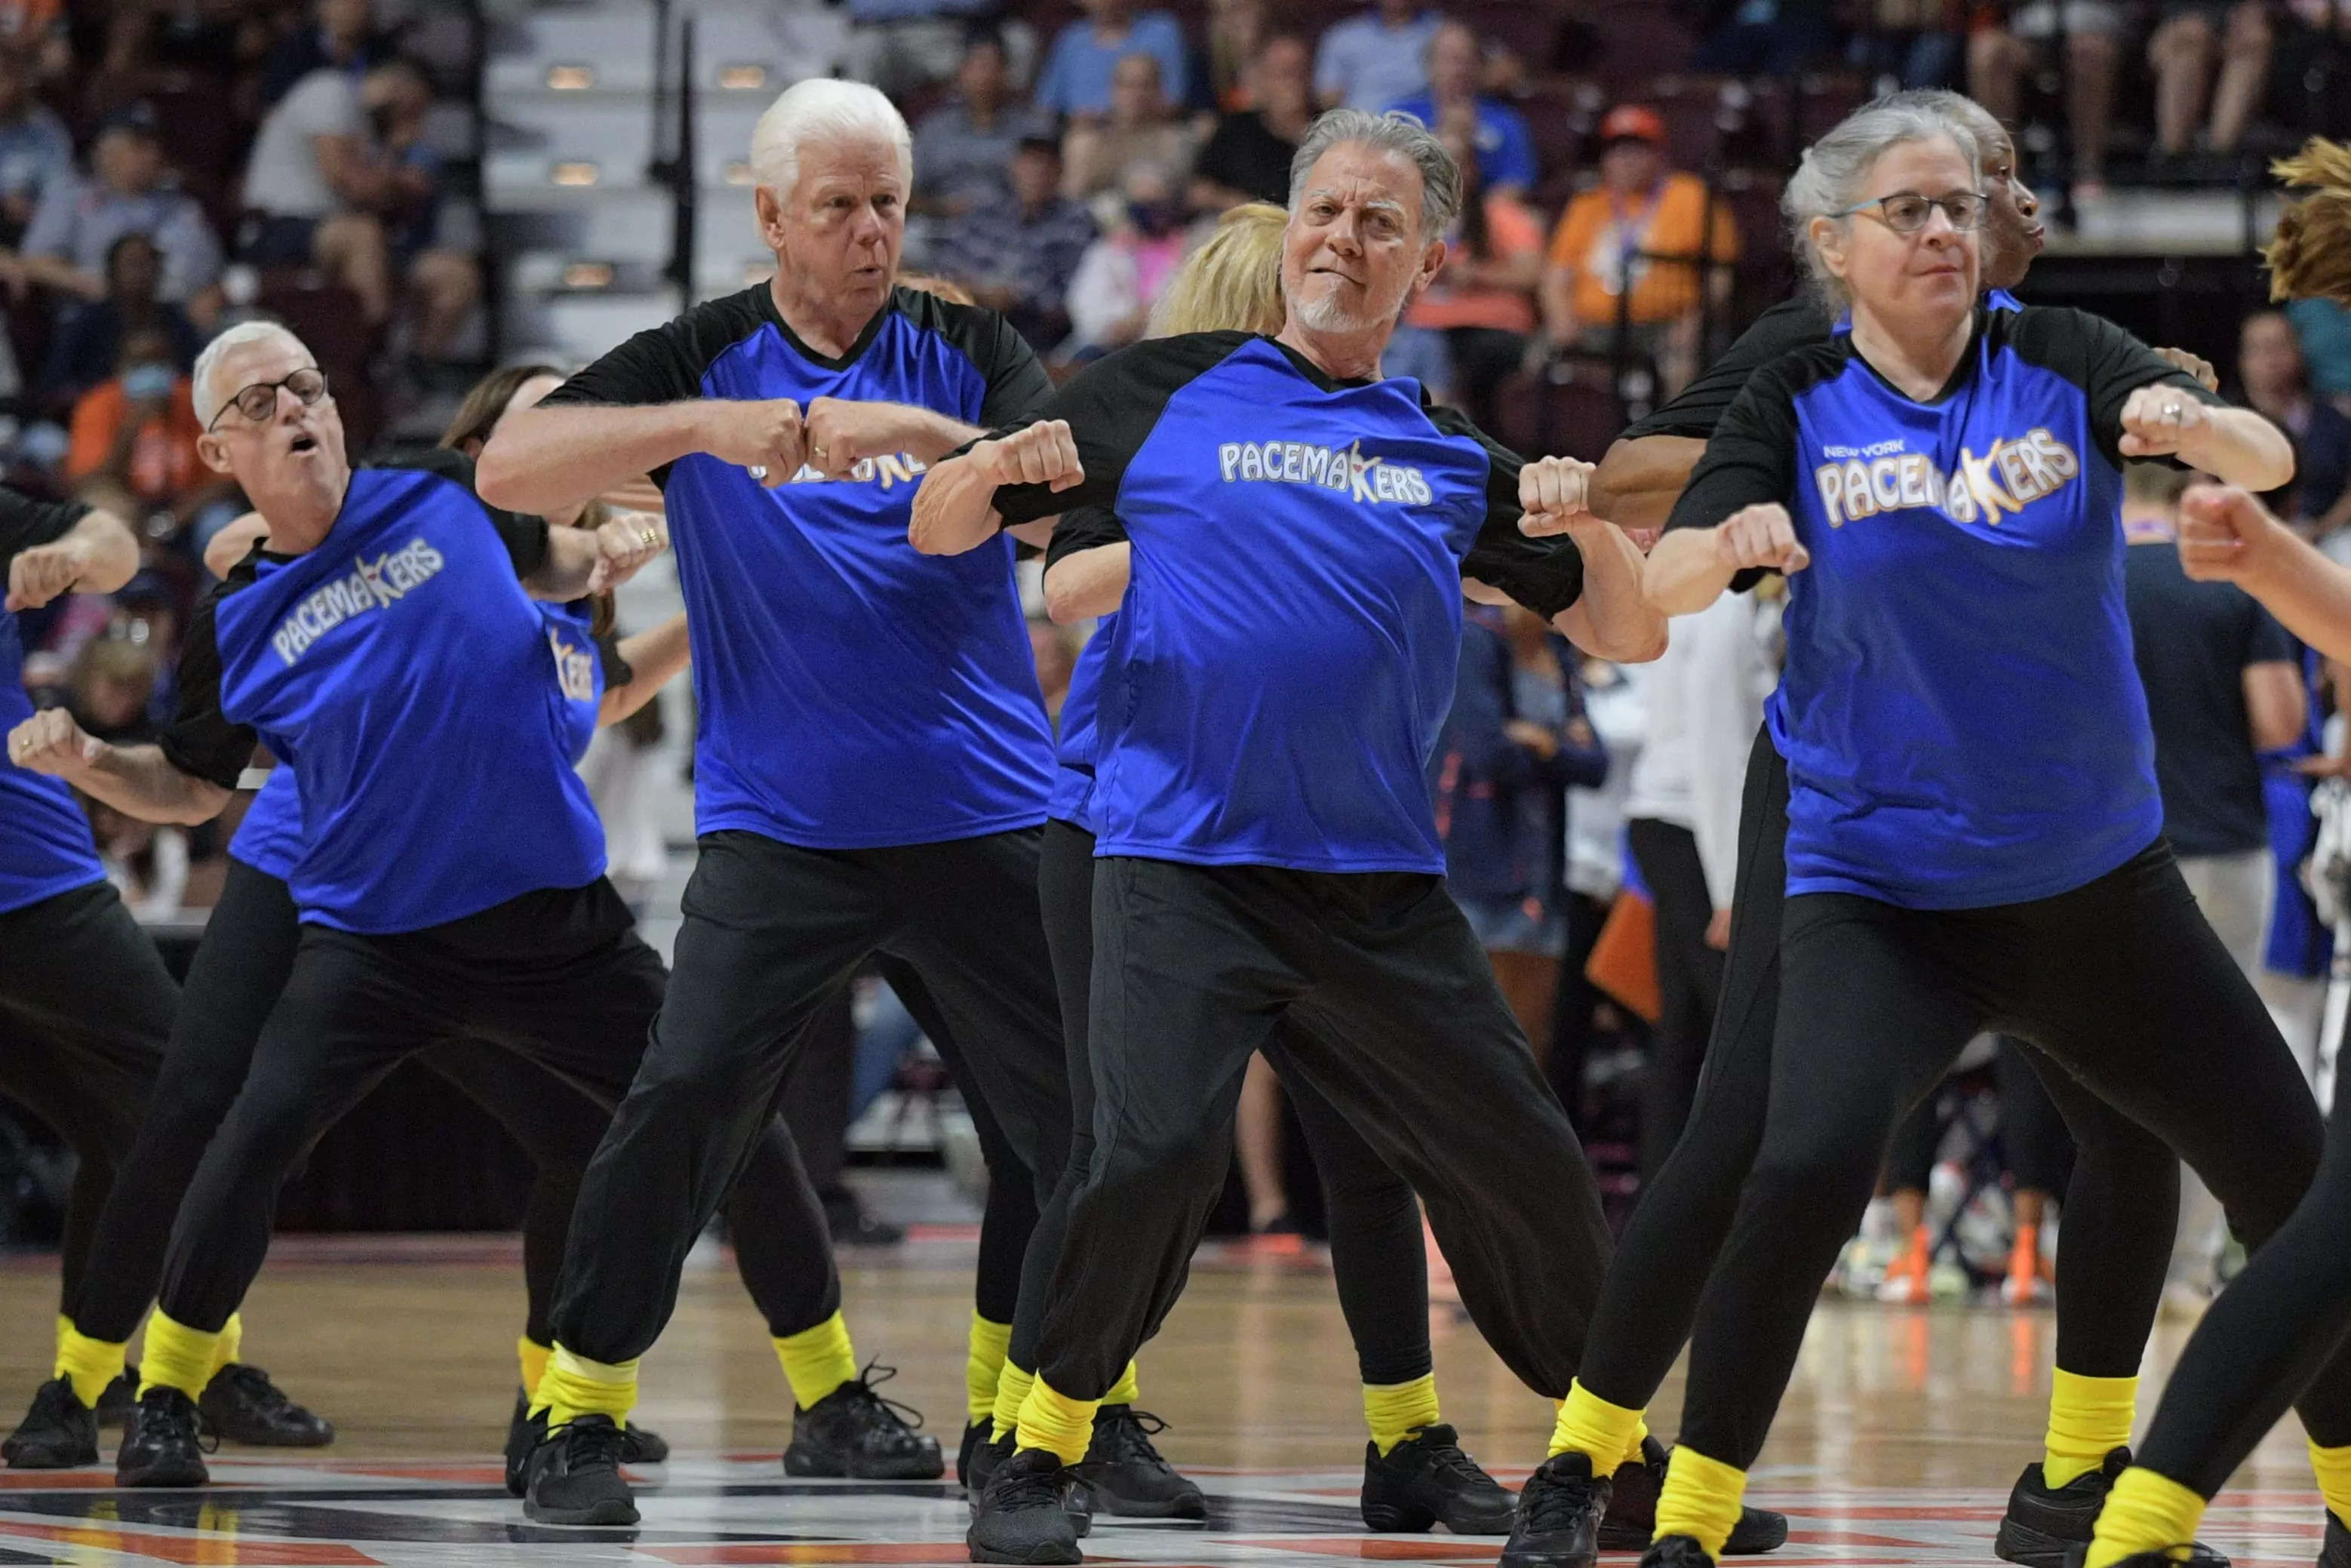 Senior Dance Group for Hire - Pacemakers Dance Team